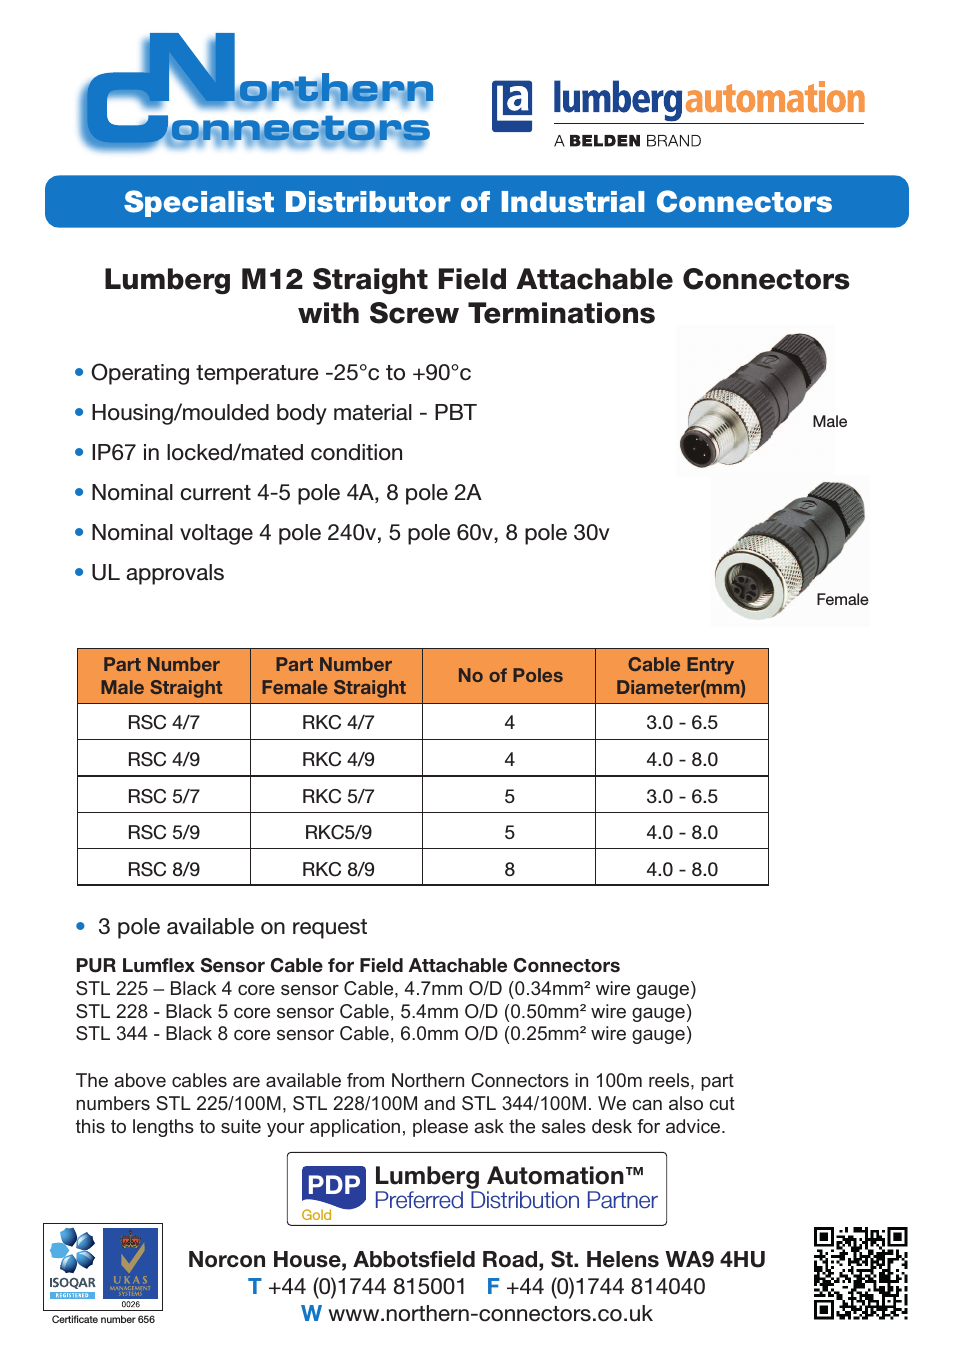 Lumberg Automation M12 Field-Attachable Cable Connectors